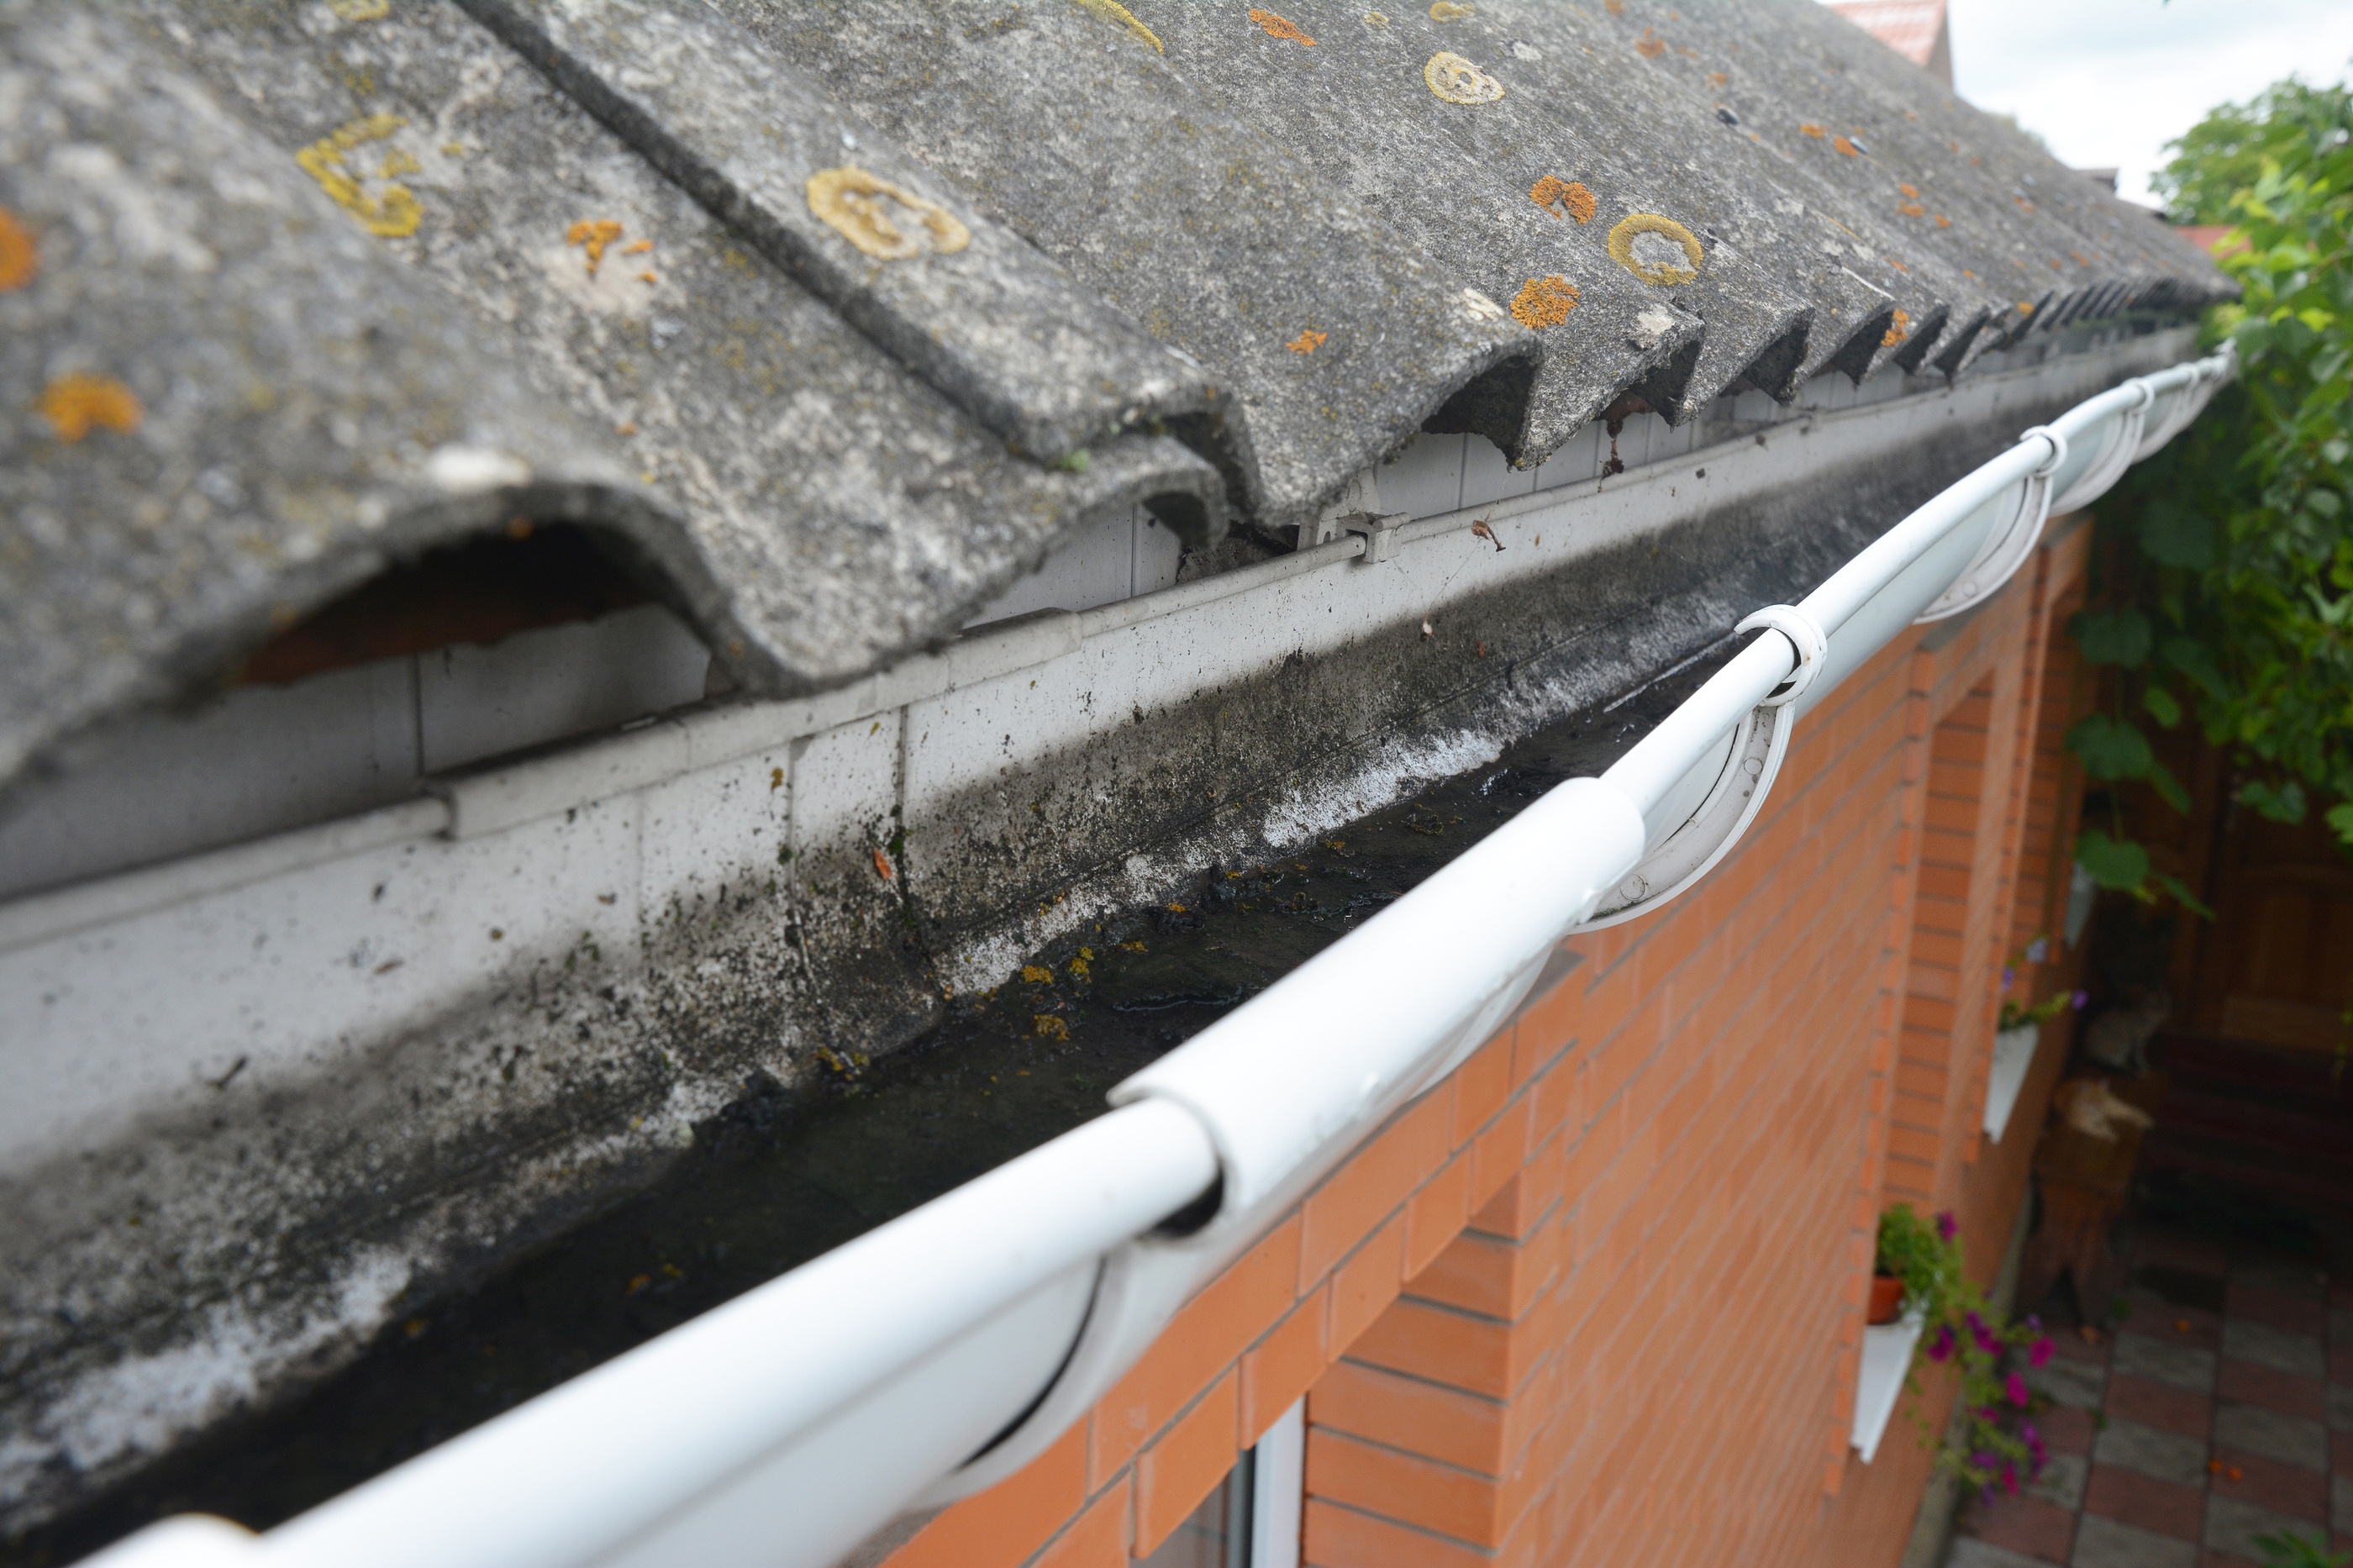 inspect the drainage pipes and downspouts